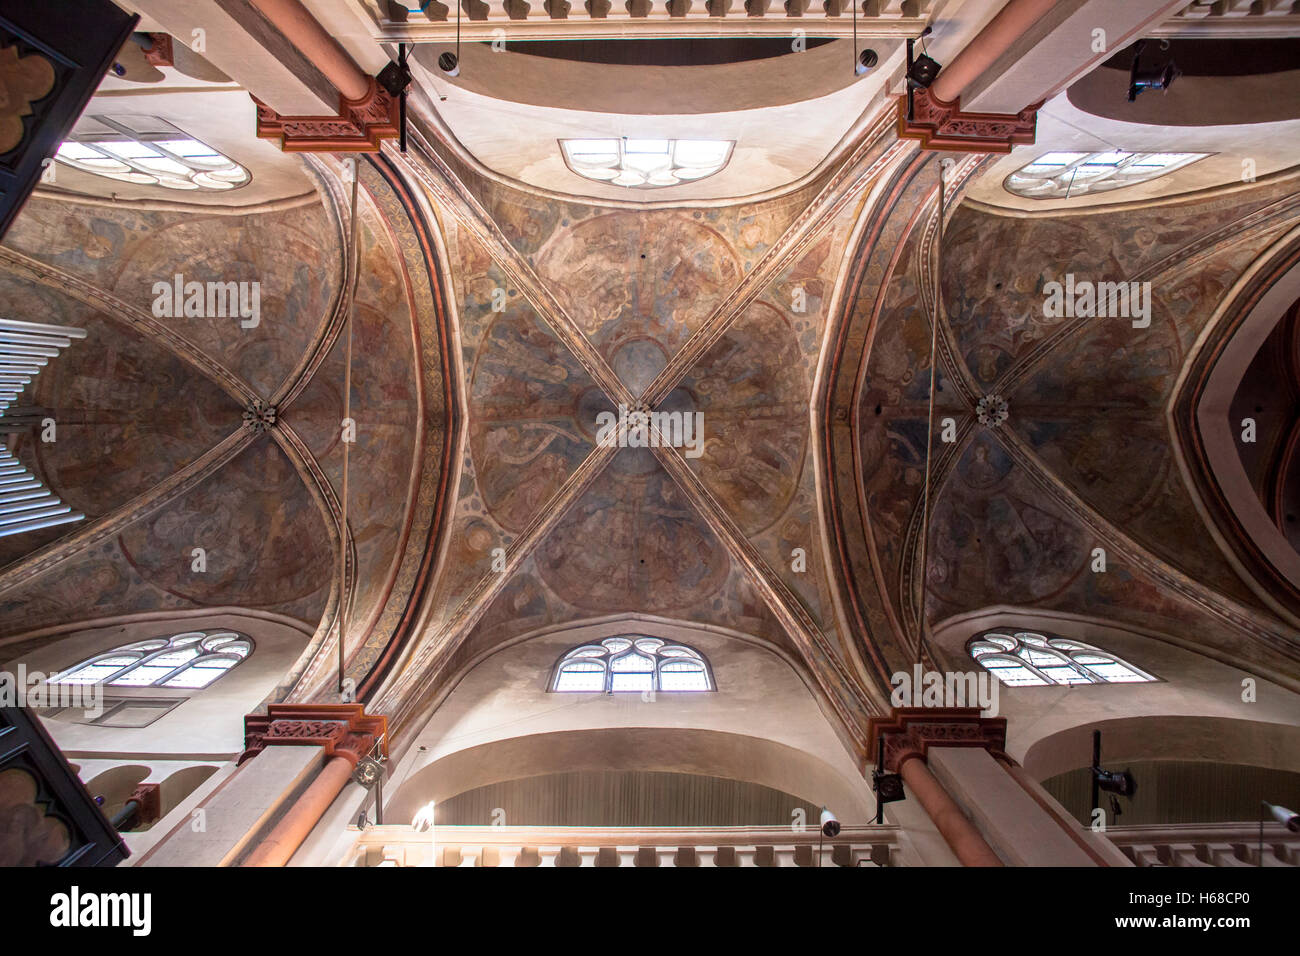 Europe, Germany, Cologne, vaulted and painted ceiling of the romanesque church St. Maria Lyskirchen. Stock Photo